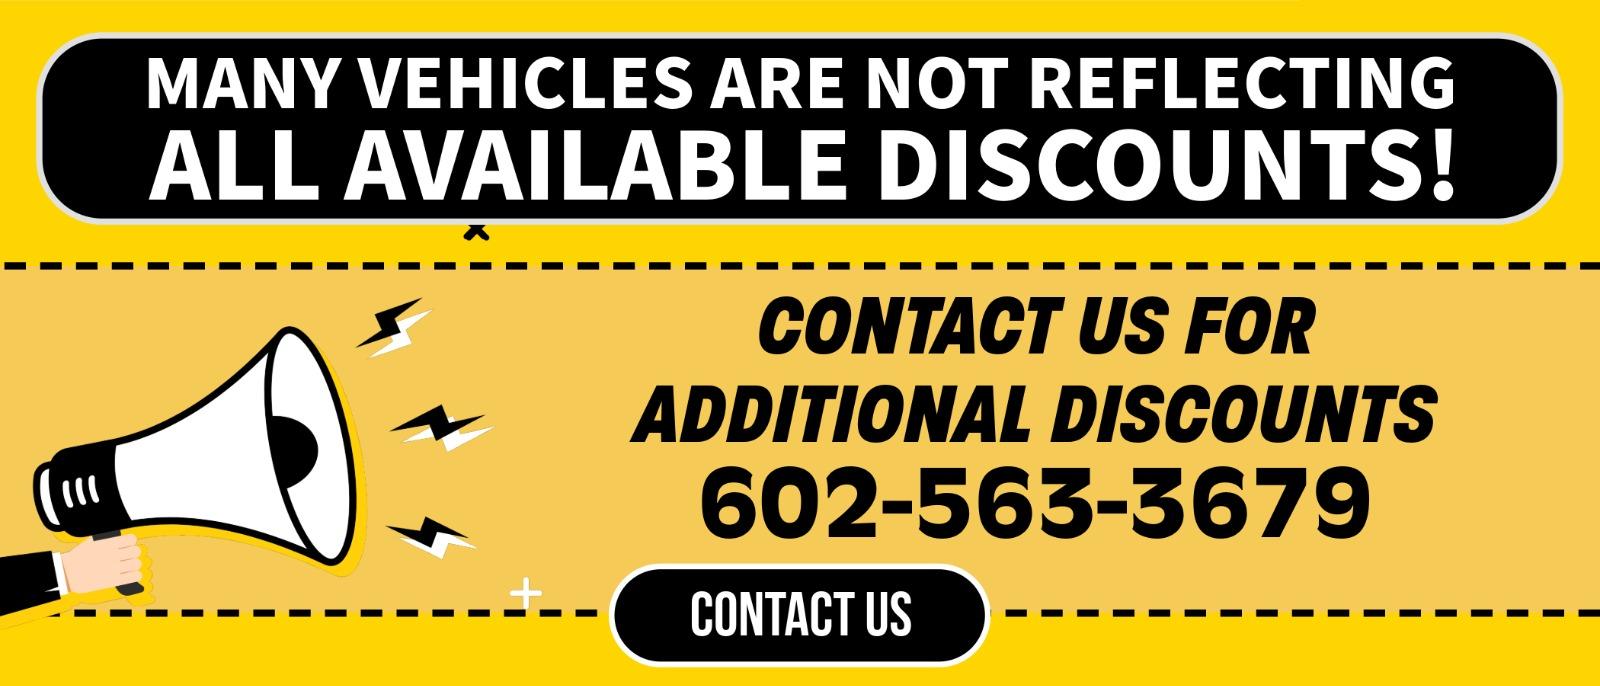 MANY VEHICLES ARE NOT REFLECTING ALL AVAILABLE DISCOUNTS!
CONTACT US FOR ADDITIONAL DISCOUNTS
602-563-3679